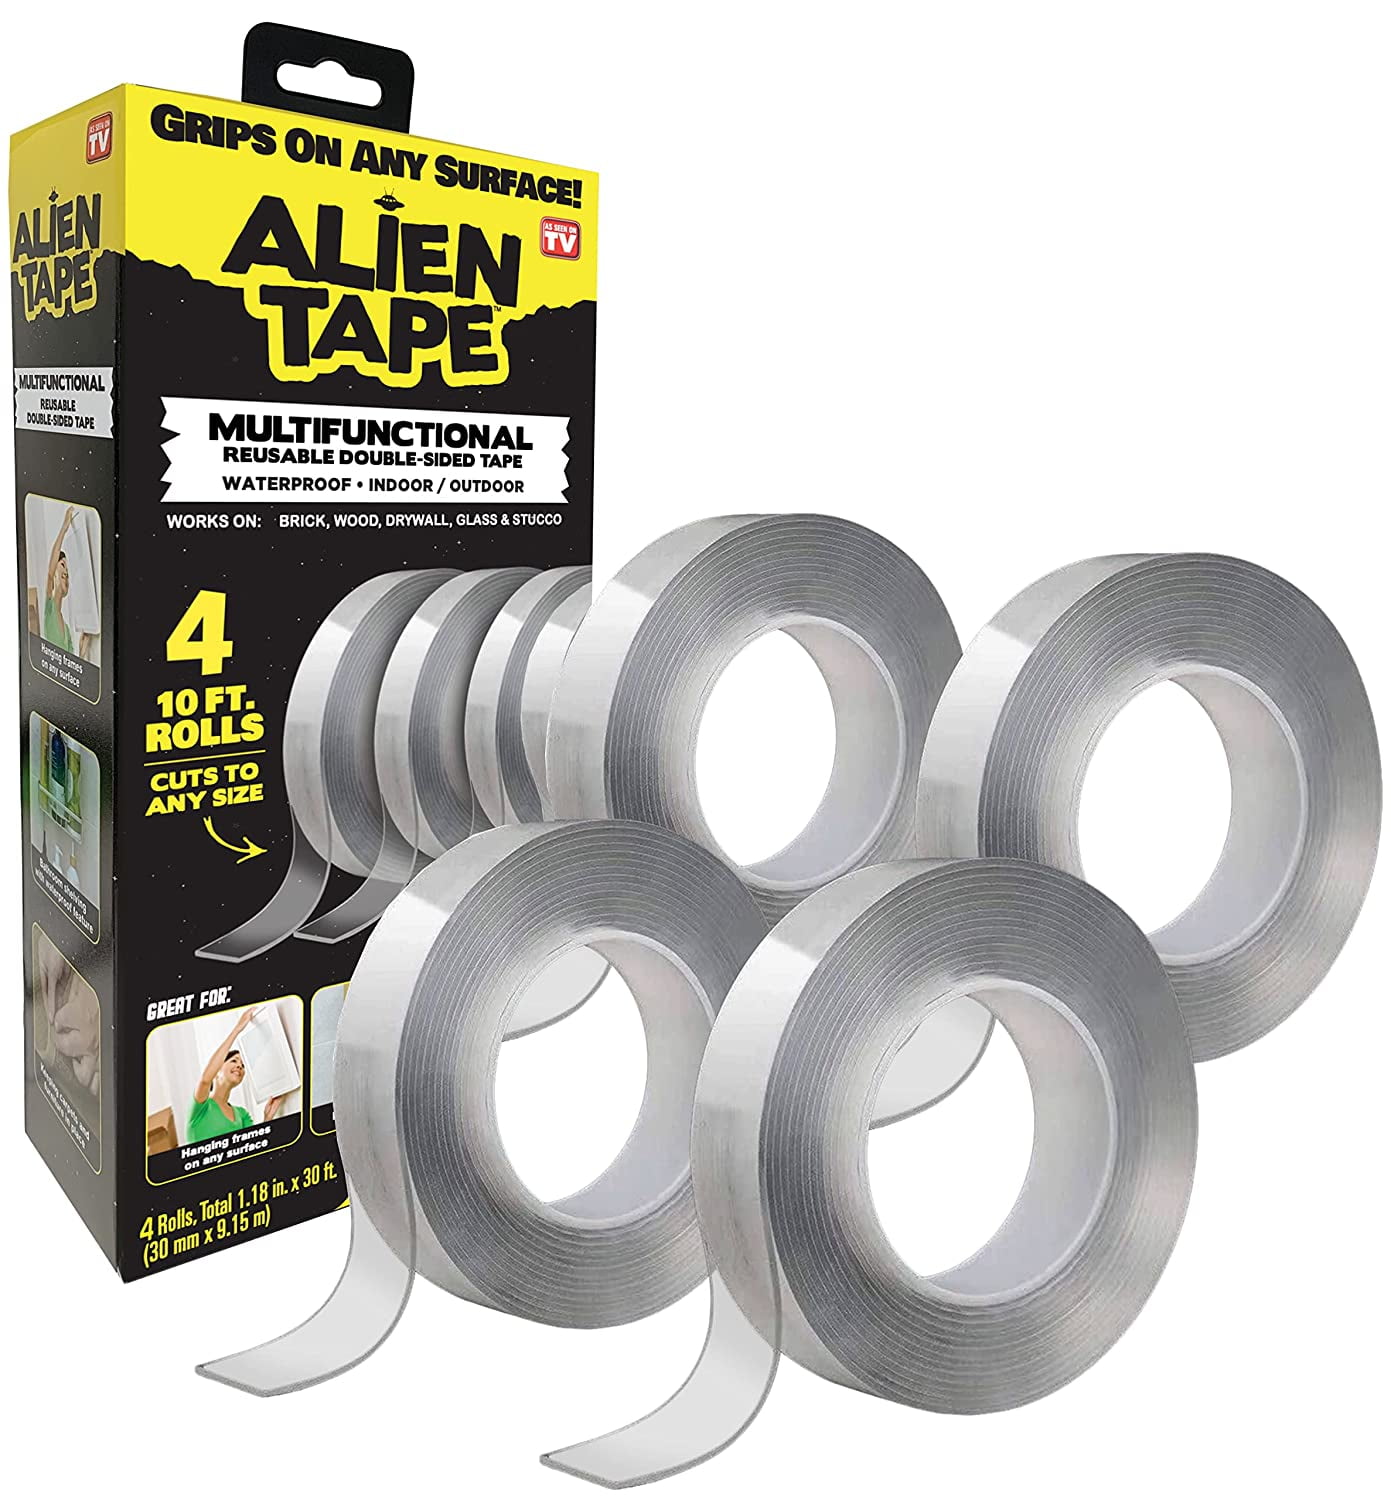 Removable Clear Double Sided Sticky Tape - No Residue, 0.7 Inches x 13  Yards (3 Rolls)